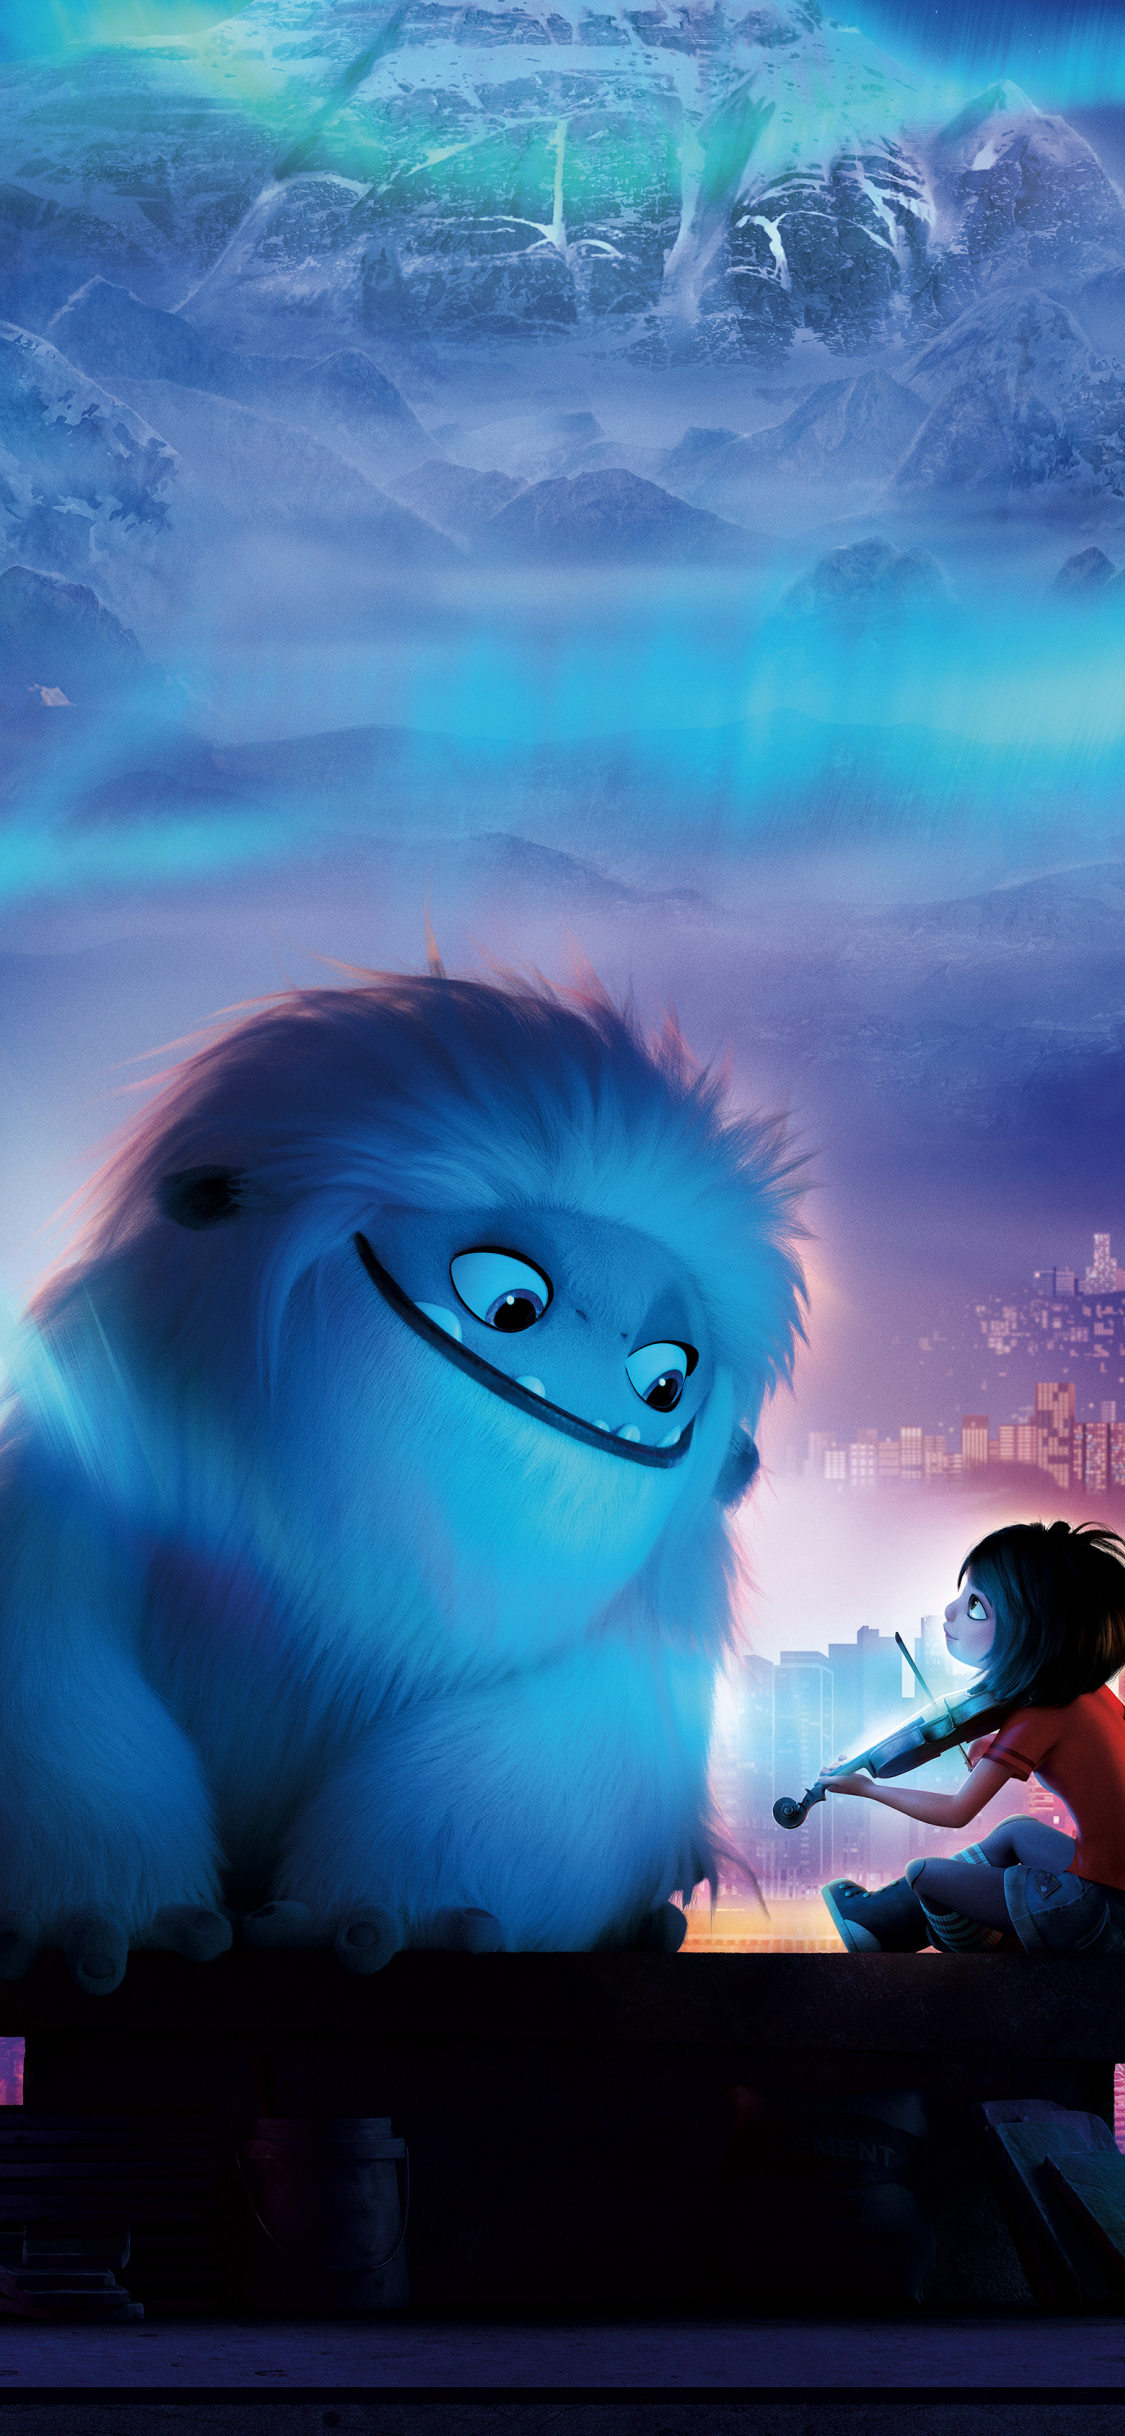 Download wallpaper 1125x2436 abominable, yeti and boy, animation movie,  iphone x, 1125x2436 hd background, 22339